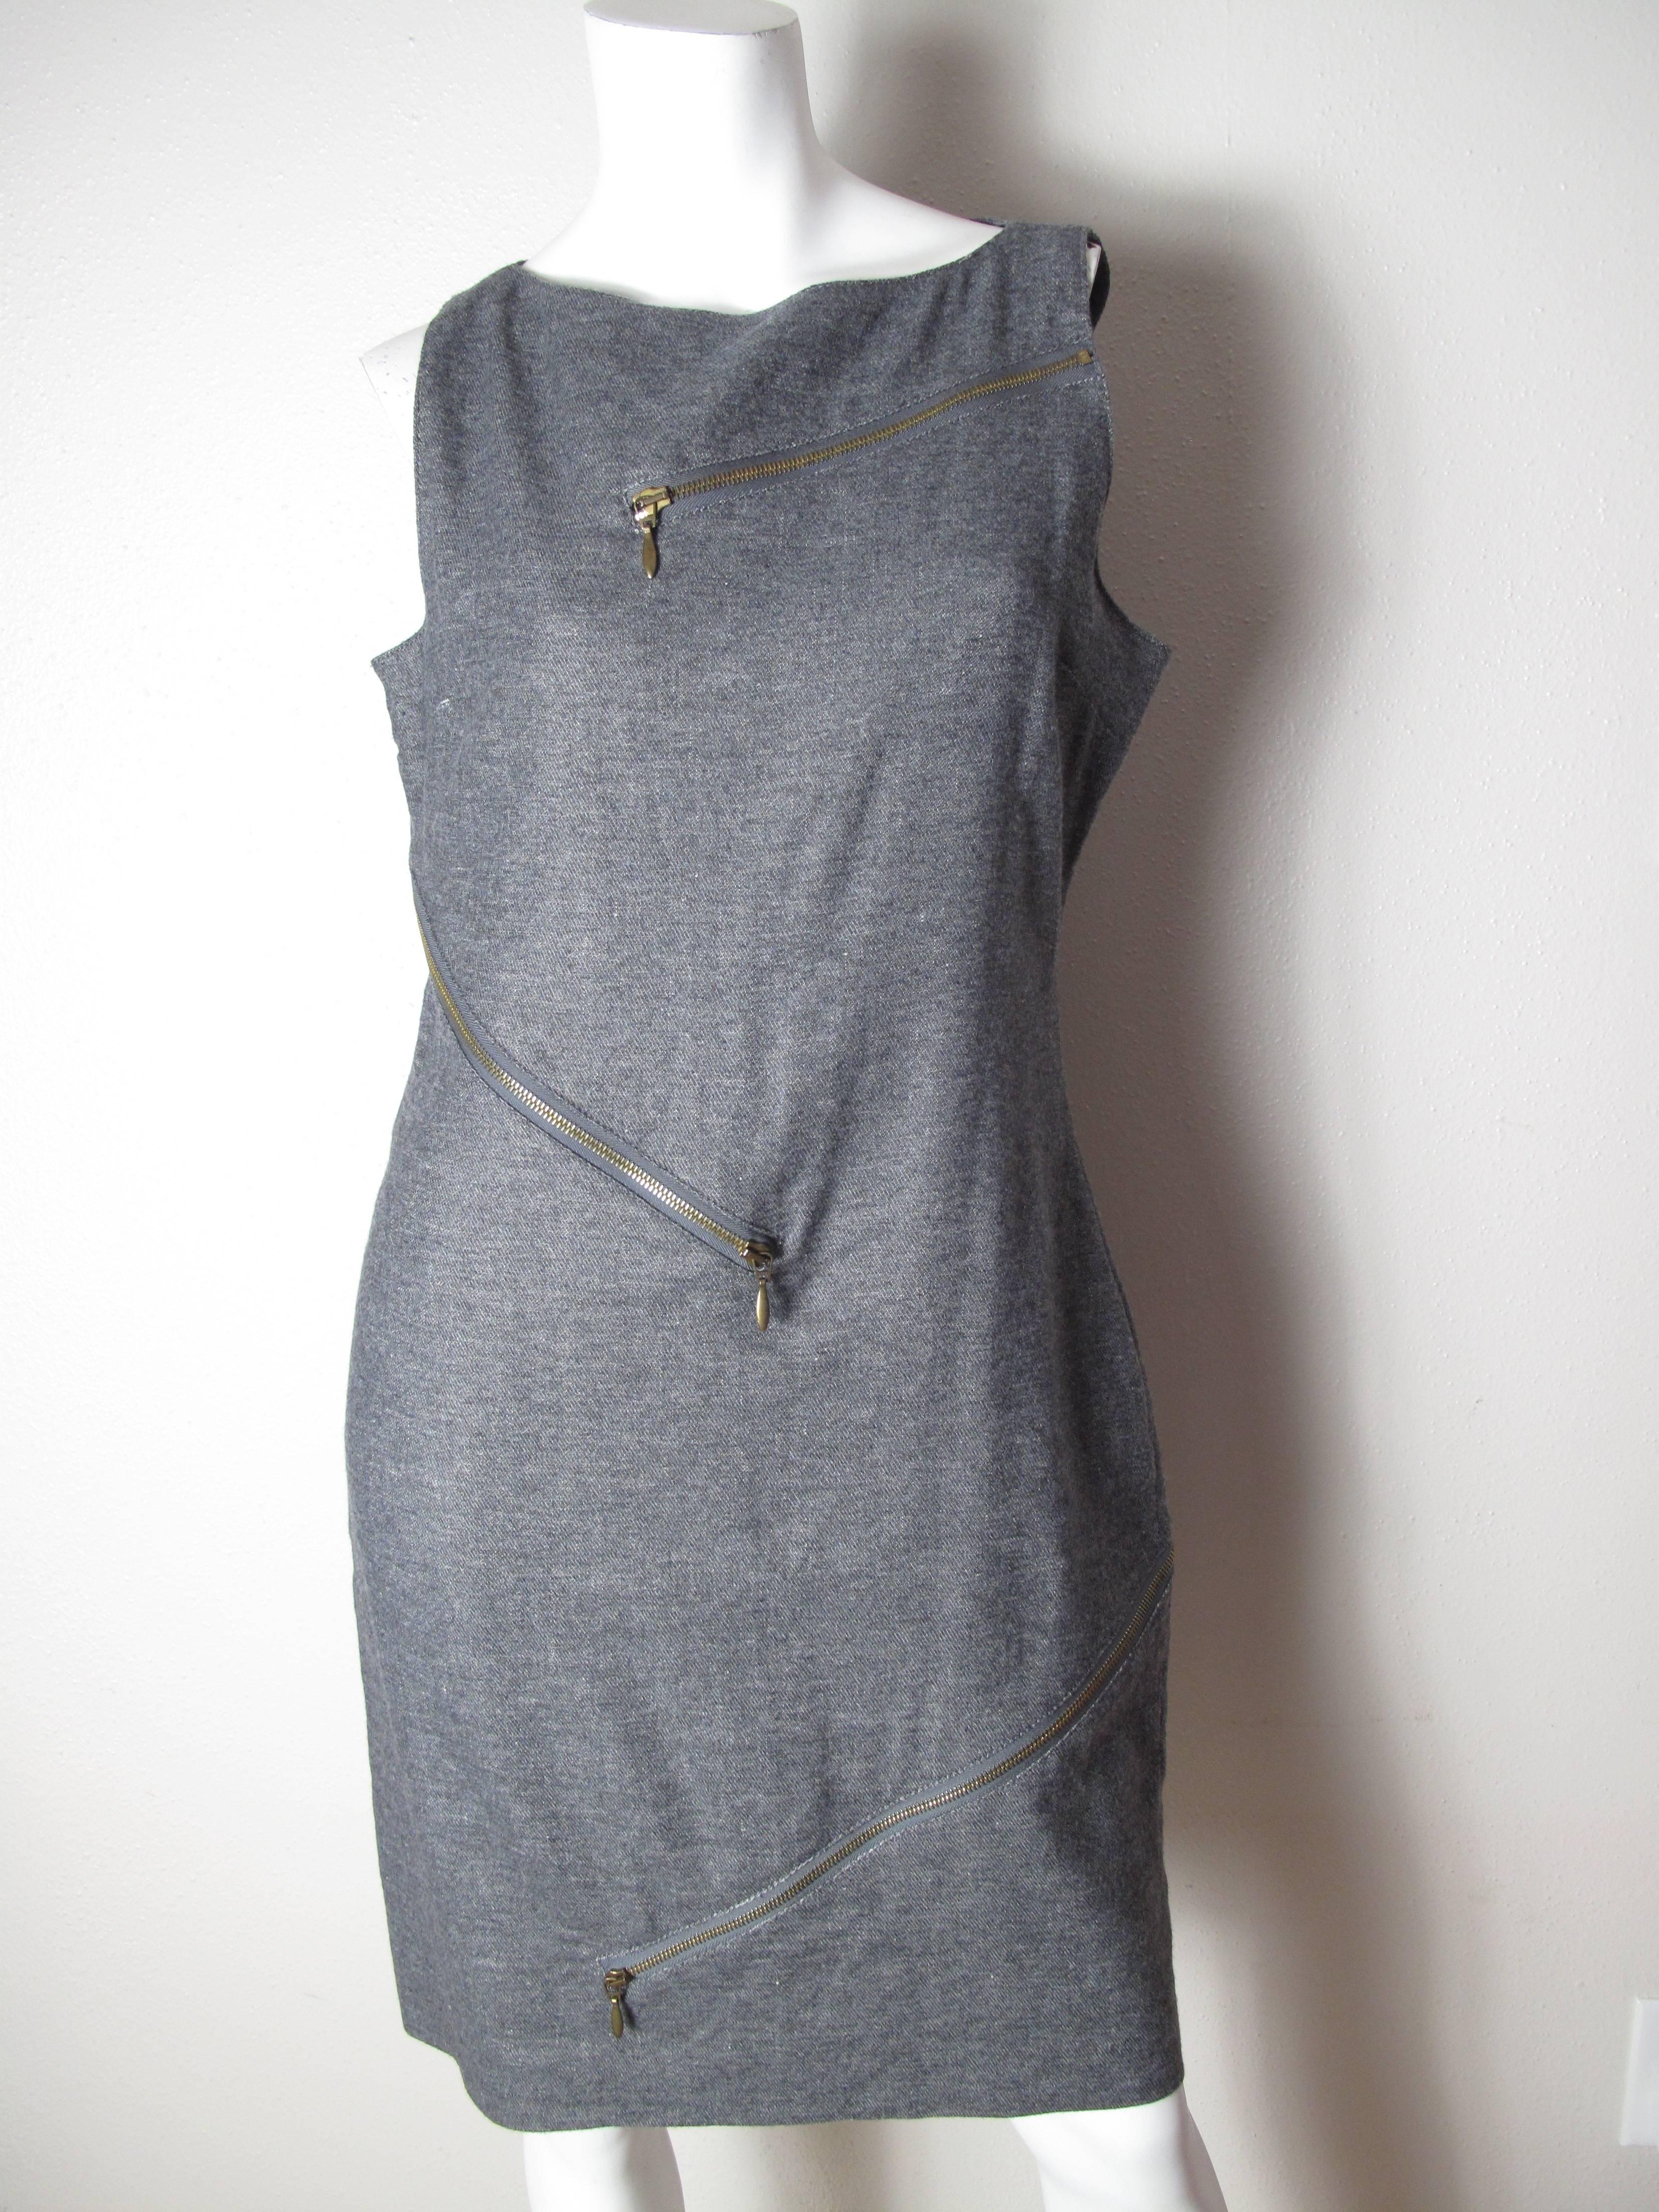 McQueen grey wool dress with zippers.  Condition: Excellent. 
Size 8 / 10
We offer free ground shipping within the US.  We accept returns for refund, please see our terms.  Please let us know if you have any questions. 